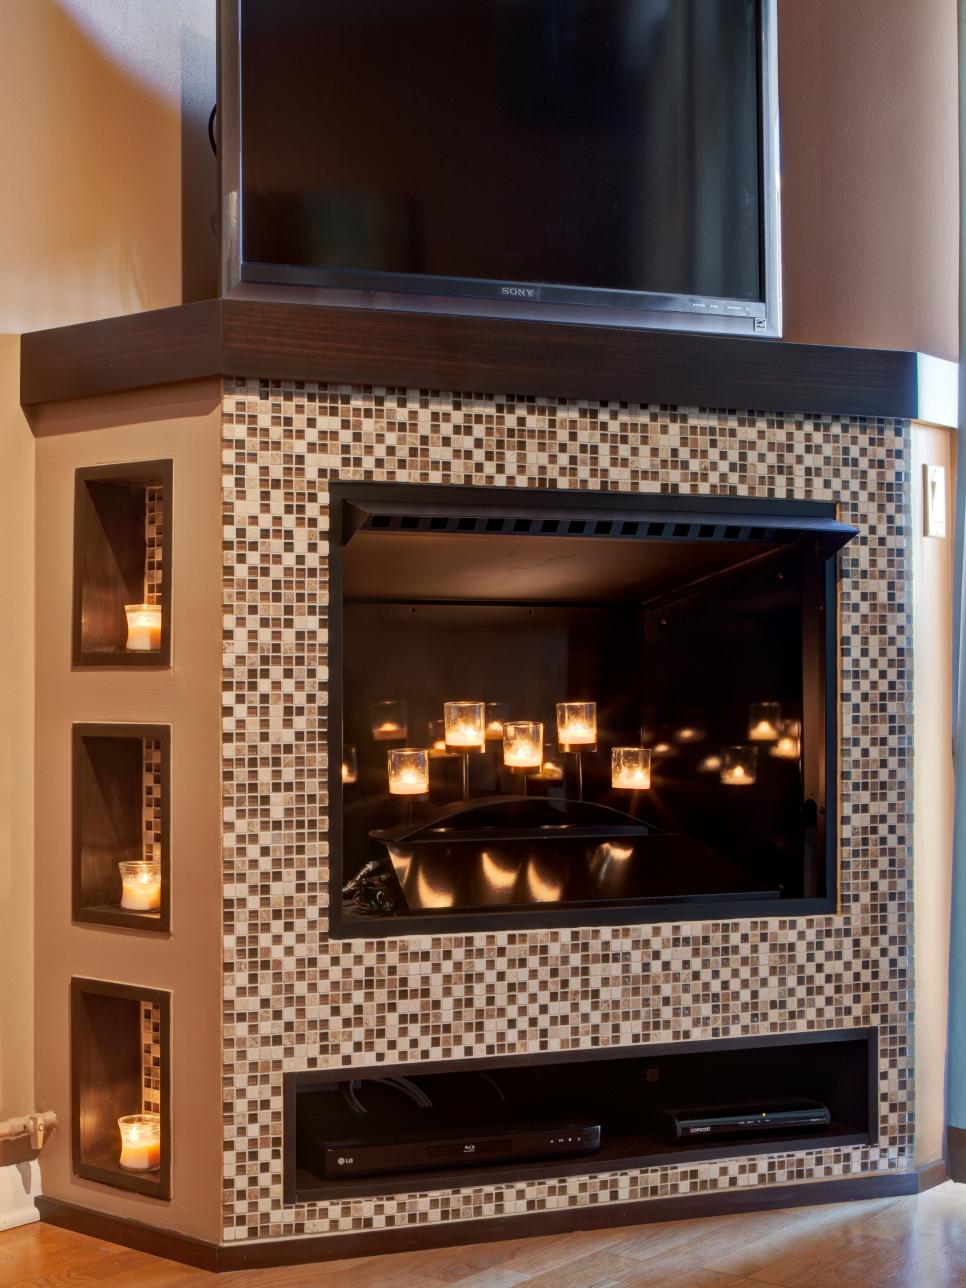 Brown-Tiled Fireplace and Entertainment Center